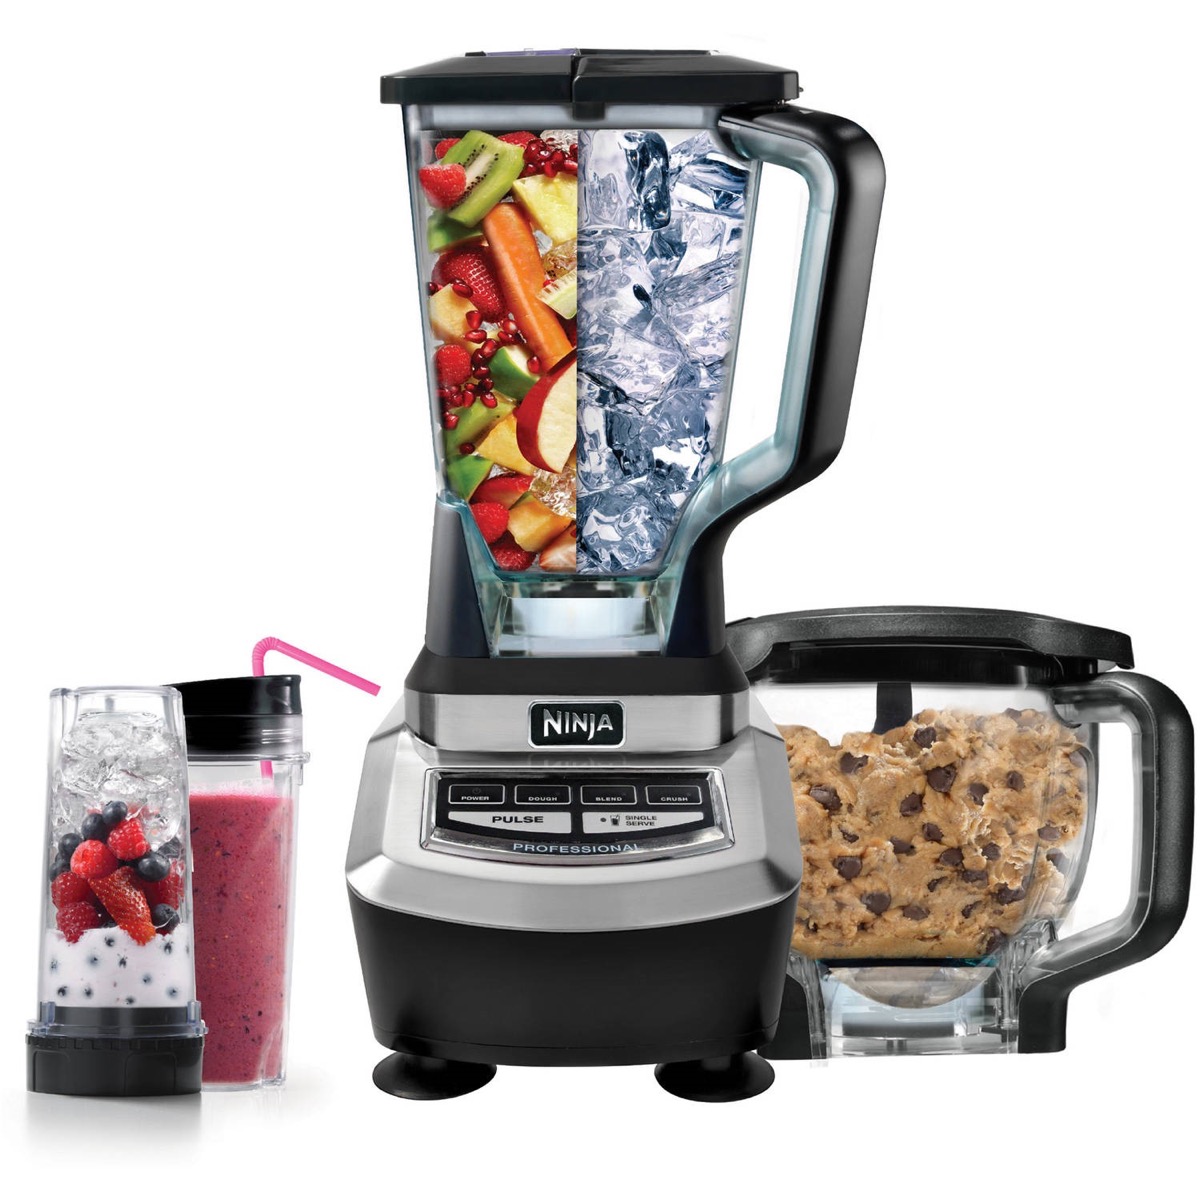 ninja blender and smoothie next to it